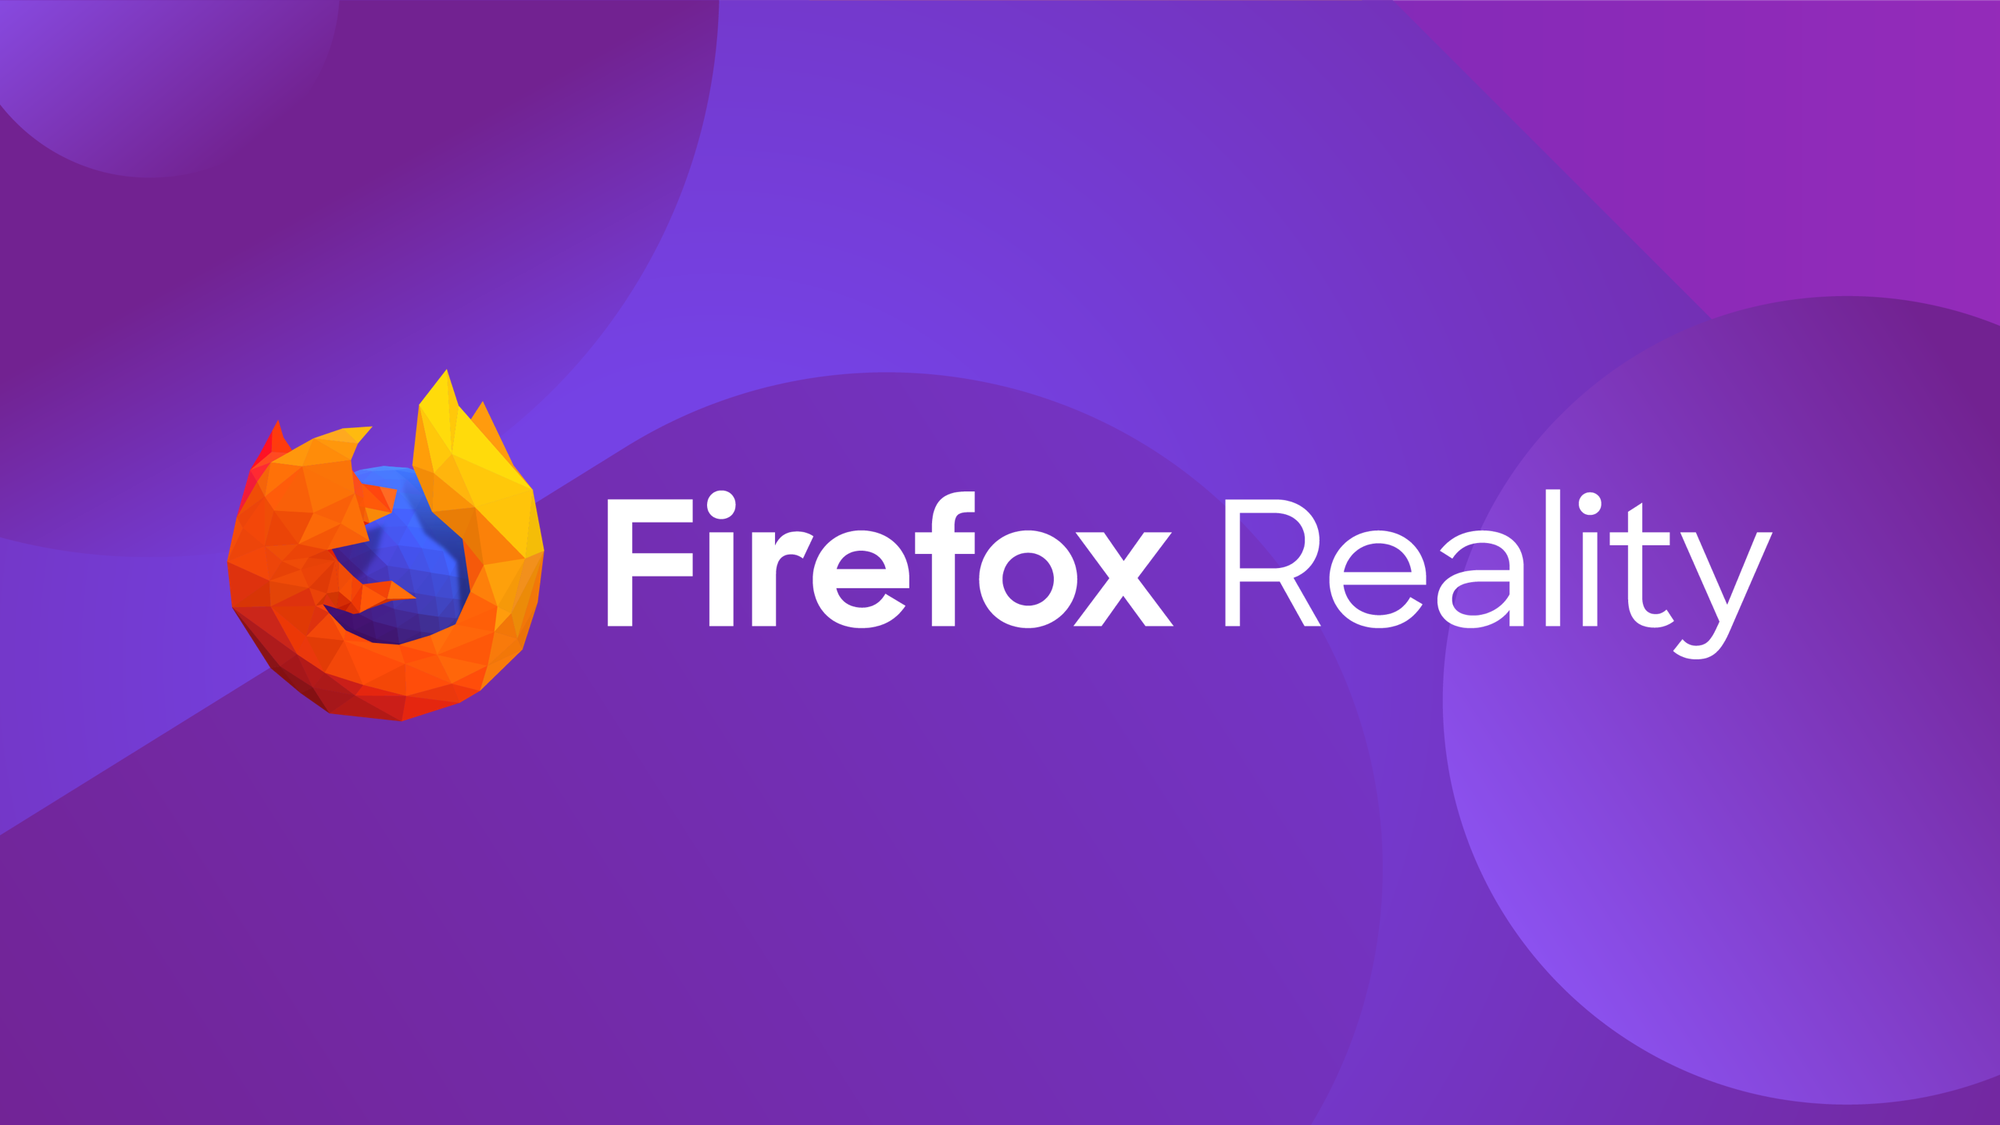 Firefox Reality for HoloLens 2 now available in Microsoft Store FxR_Logo_Lockups-2560x1440_AQ-4-1.png